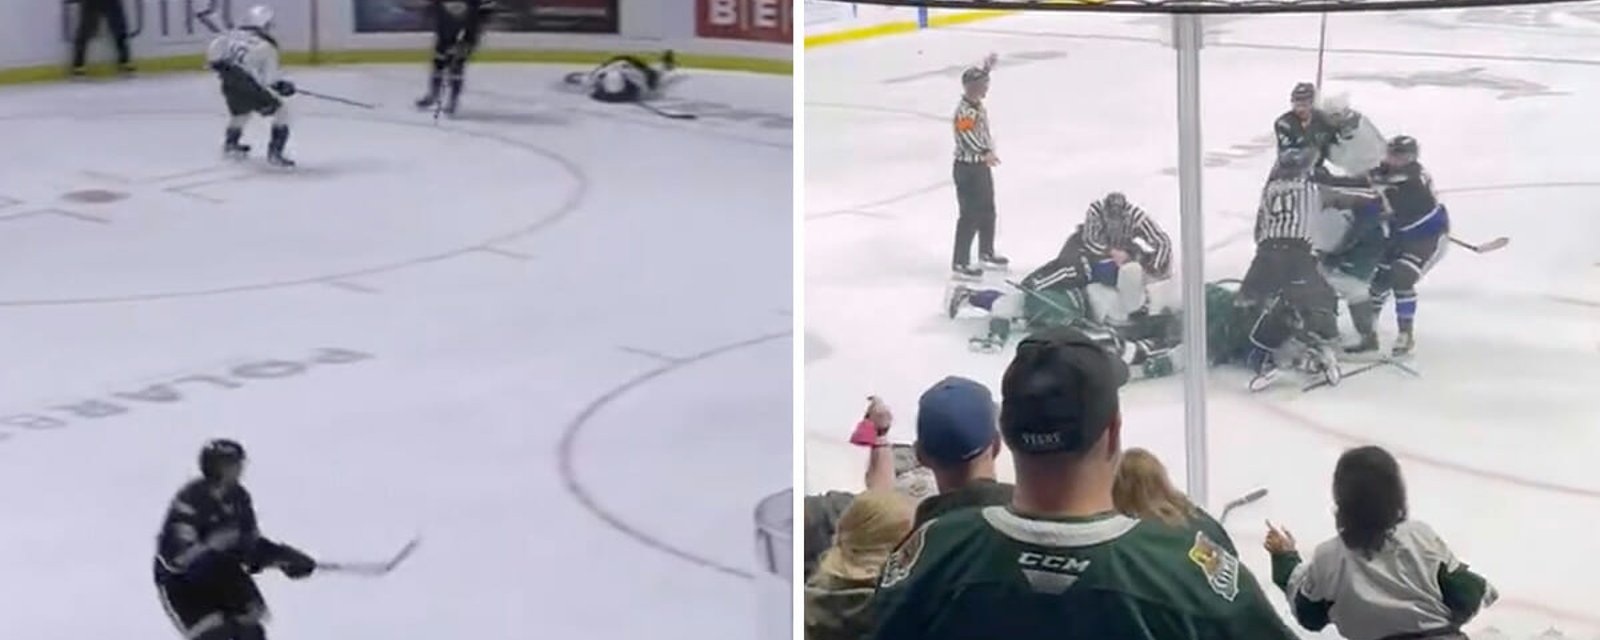 WHL forward suspended 25 games for hit that sends opponent to hospital